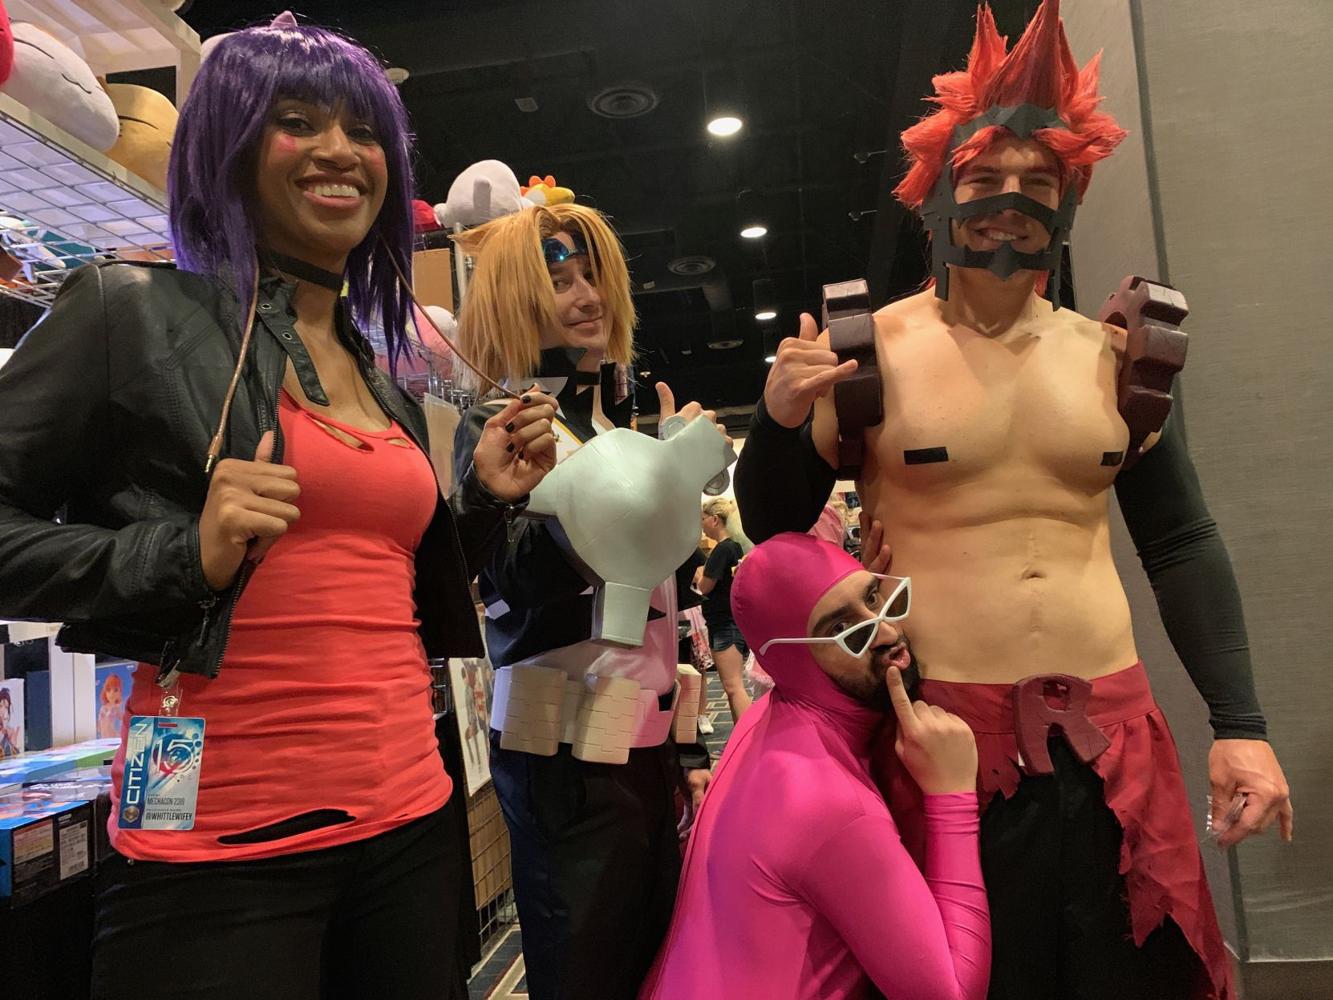 Photos, video See some of the best anime cosplay costumes at MechaCon